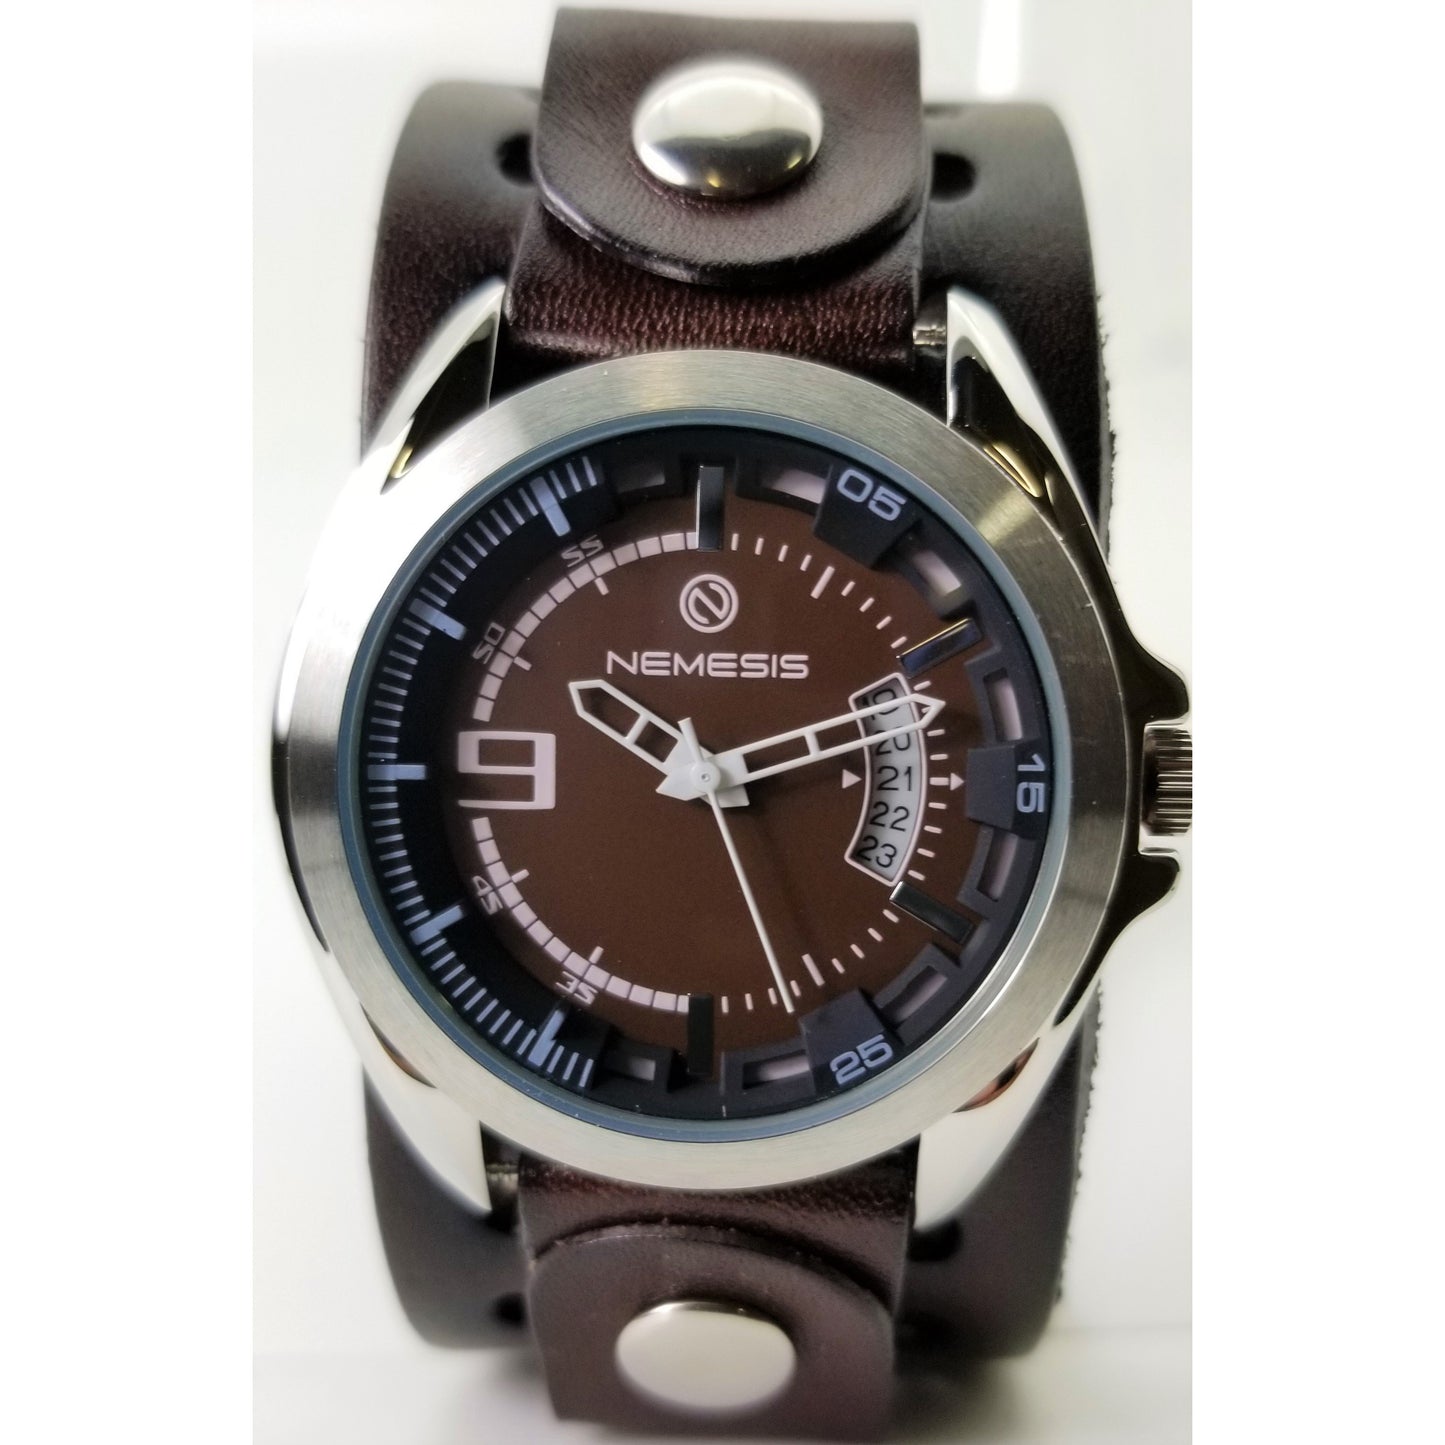 Sully Brown/White Watch with Perforated Dark Brown Leather Cuff